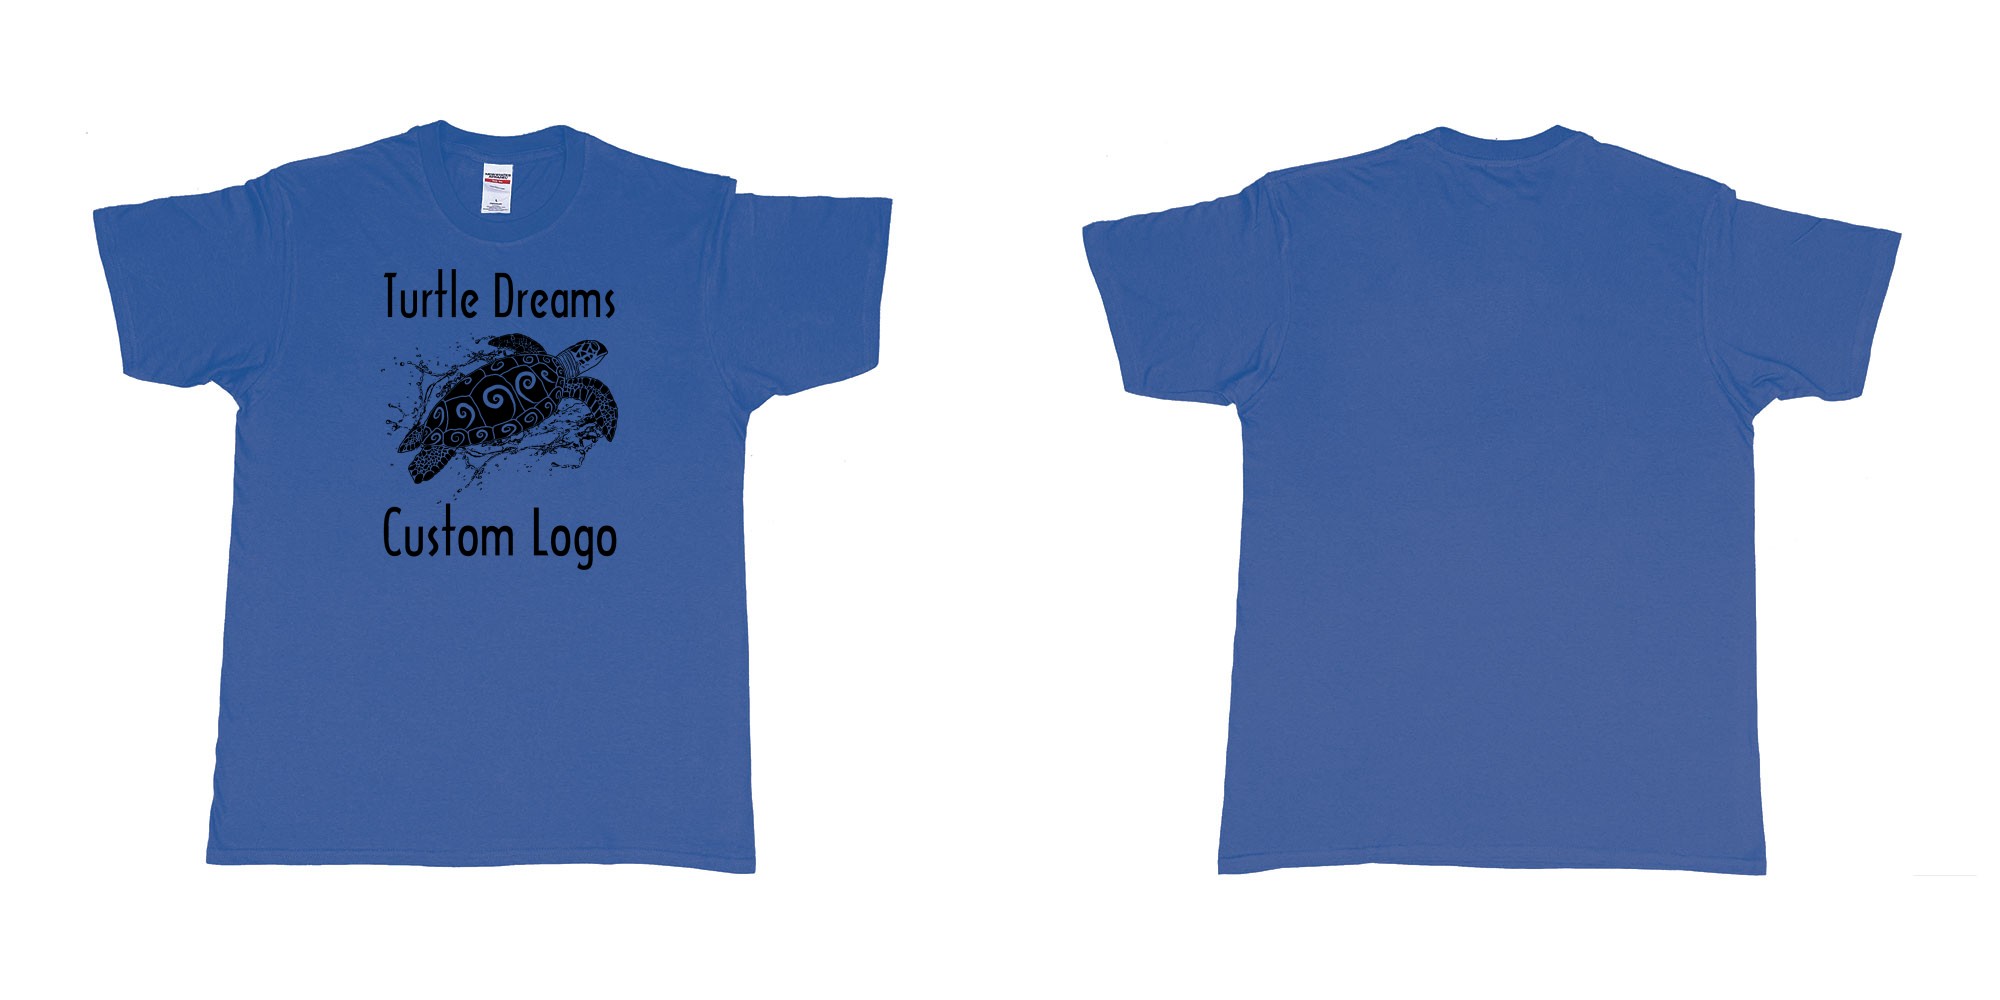 Custom tshirt design turtle dreams custom logo design in fabric color royal-blue choice your own text made in Bali by The Pirate Way